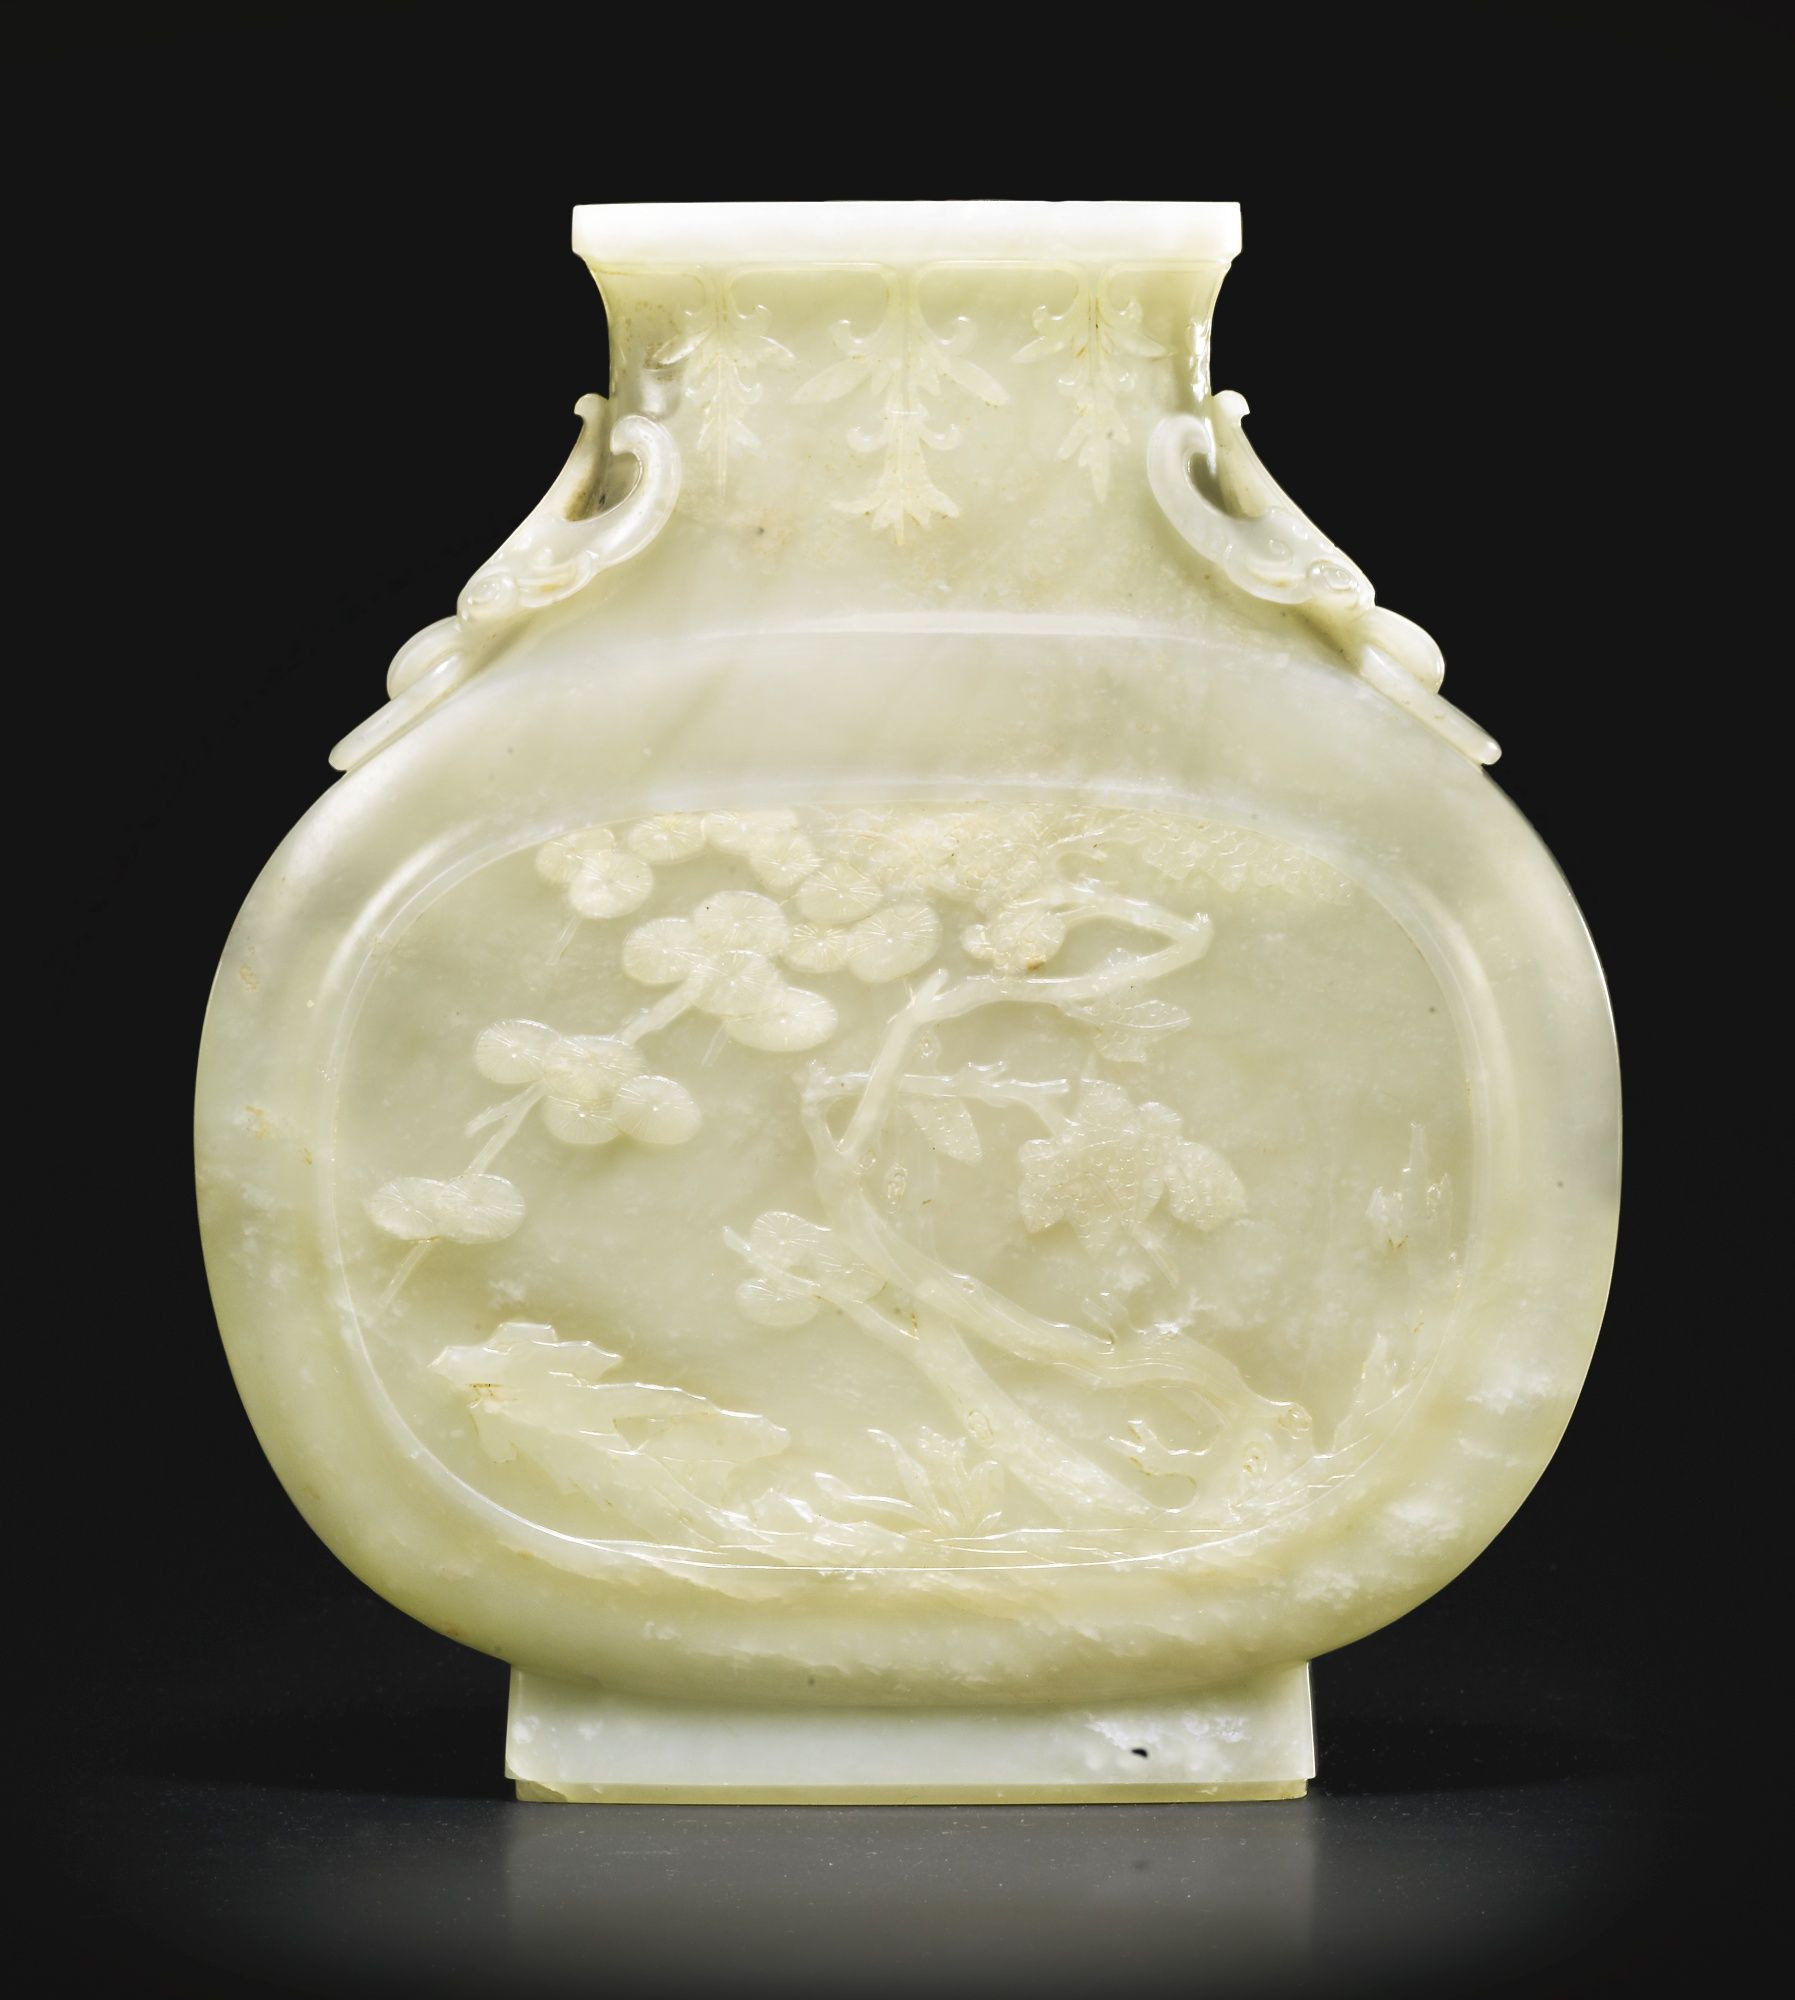 16 Unique Lime Green Ceramic Vase 2022 free download lime green ceramic vase of a pale green jade vase qing dynasty late 18th early 19th century of intended for a pale green jade vase qing dynasty late 18th early 19th century of flattened